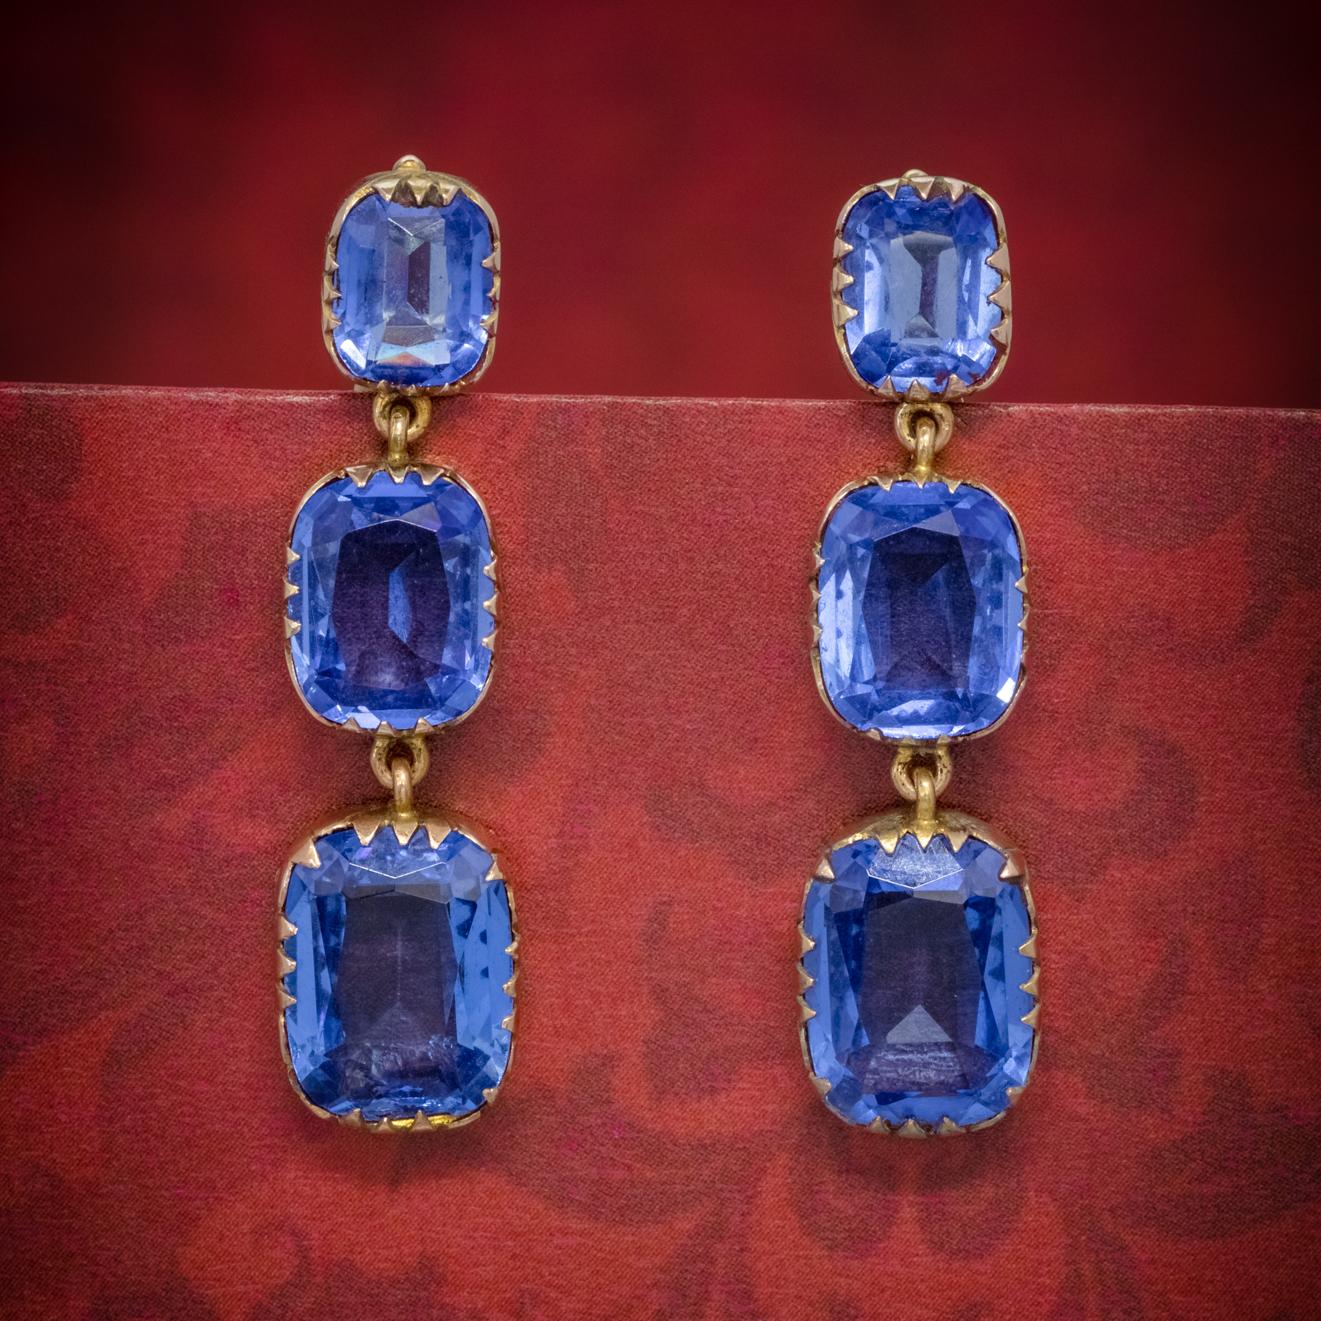 A fabulous pair of Antique late Victorian triple drop earrings set with three beautiful Bristol blue Paste Stones, approx. 10ct in each earring, 20ct in total.  

Paste is a transparent flint glass that simulates the fire and brilliance of